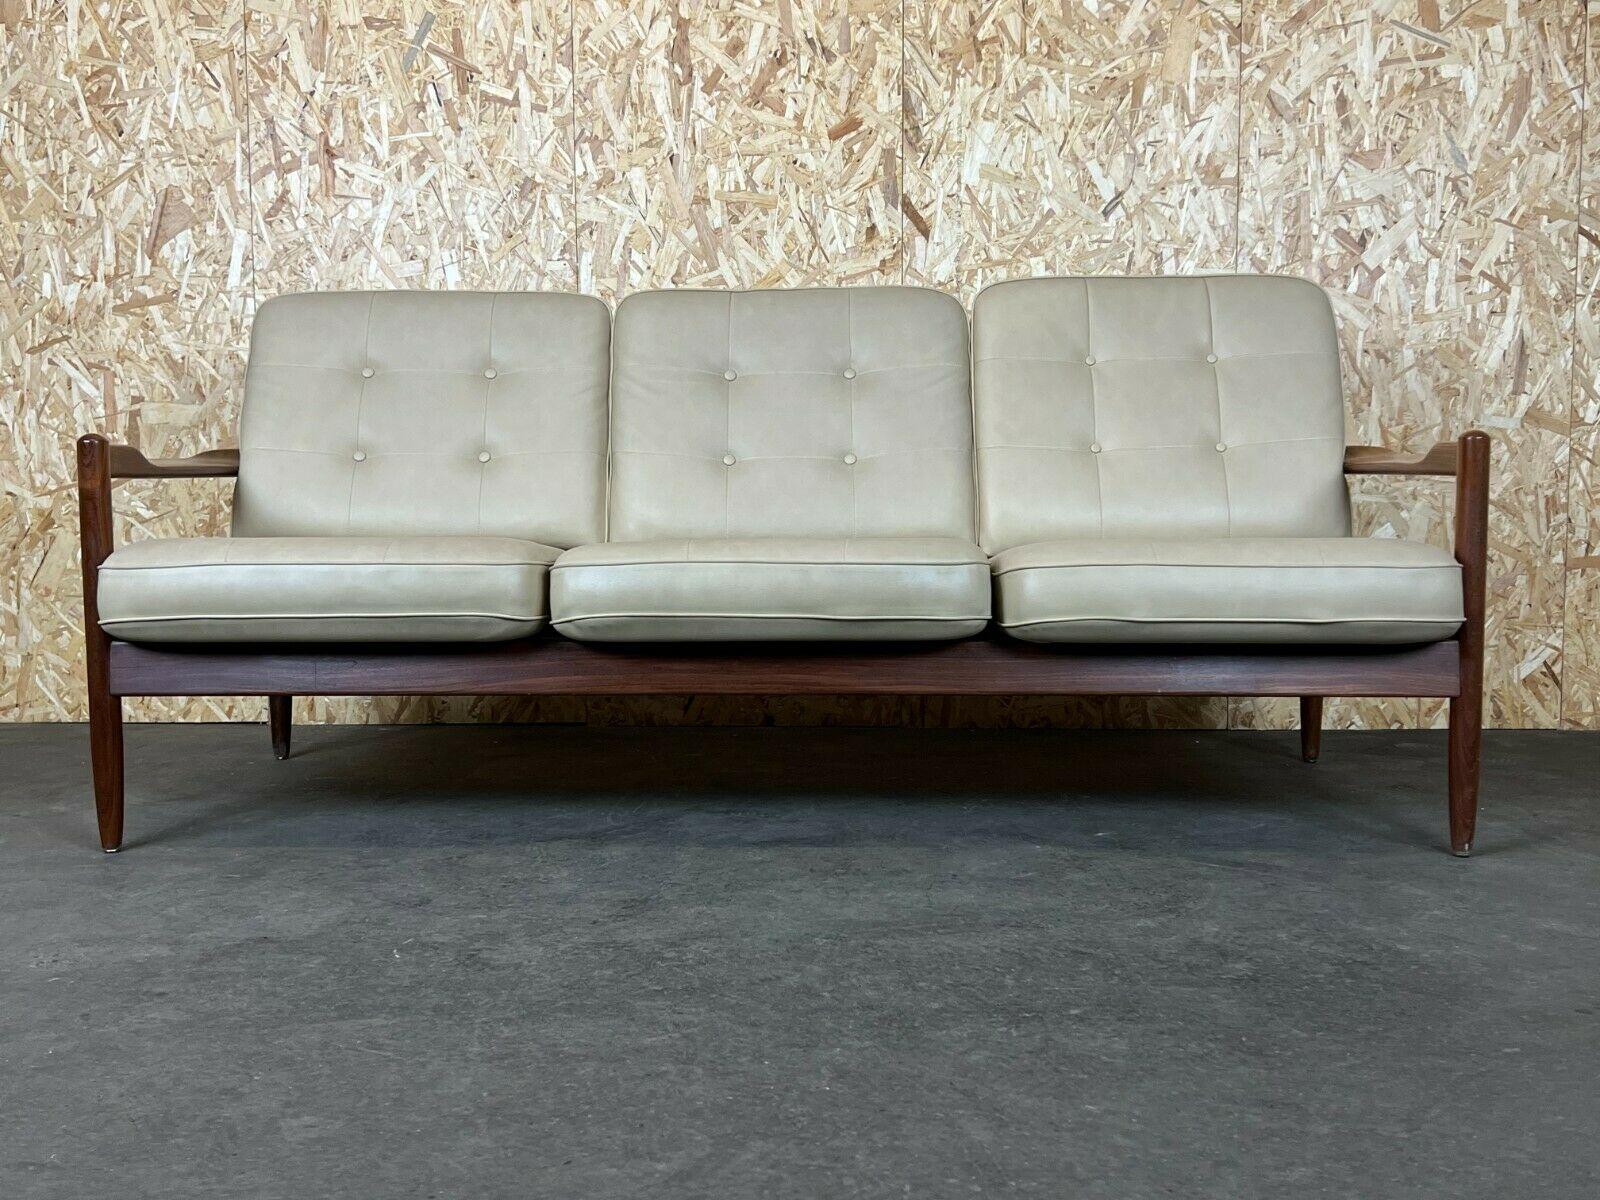 60s 70s sofa 3-seater couch seating set Danish Modern Design Denmark 60s 70s

Object: sofa

Manufacturer:

Condition: good - vintage

Age: around 1960-1970

Dimensions:

192cm x 84cm x 81cm
Seat height = 41cm

Other notes:

The